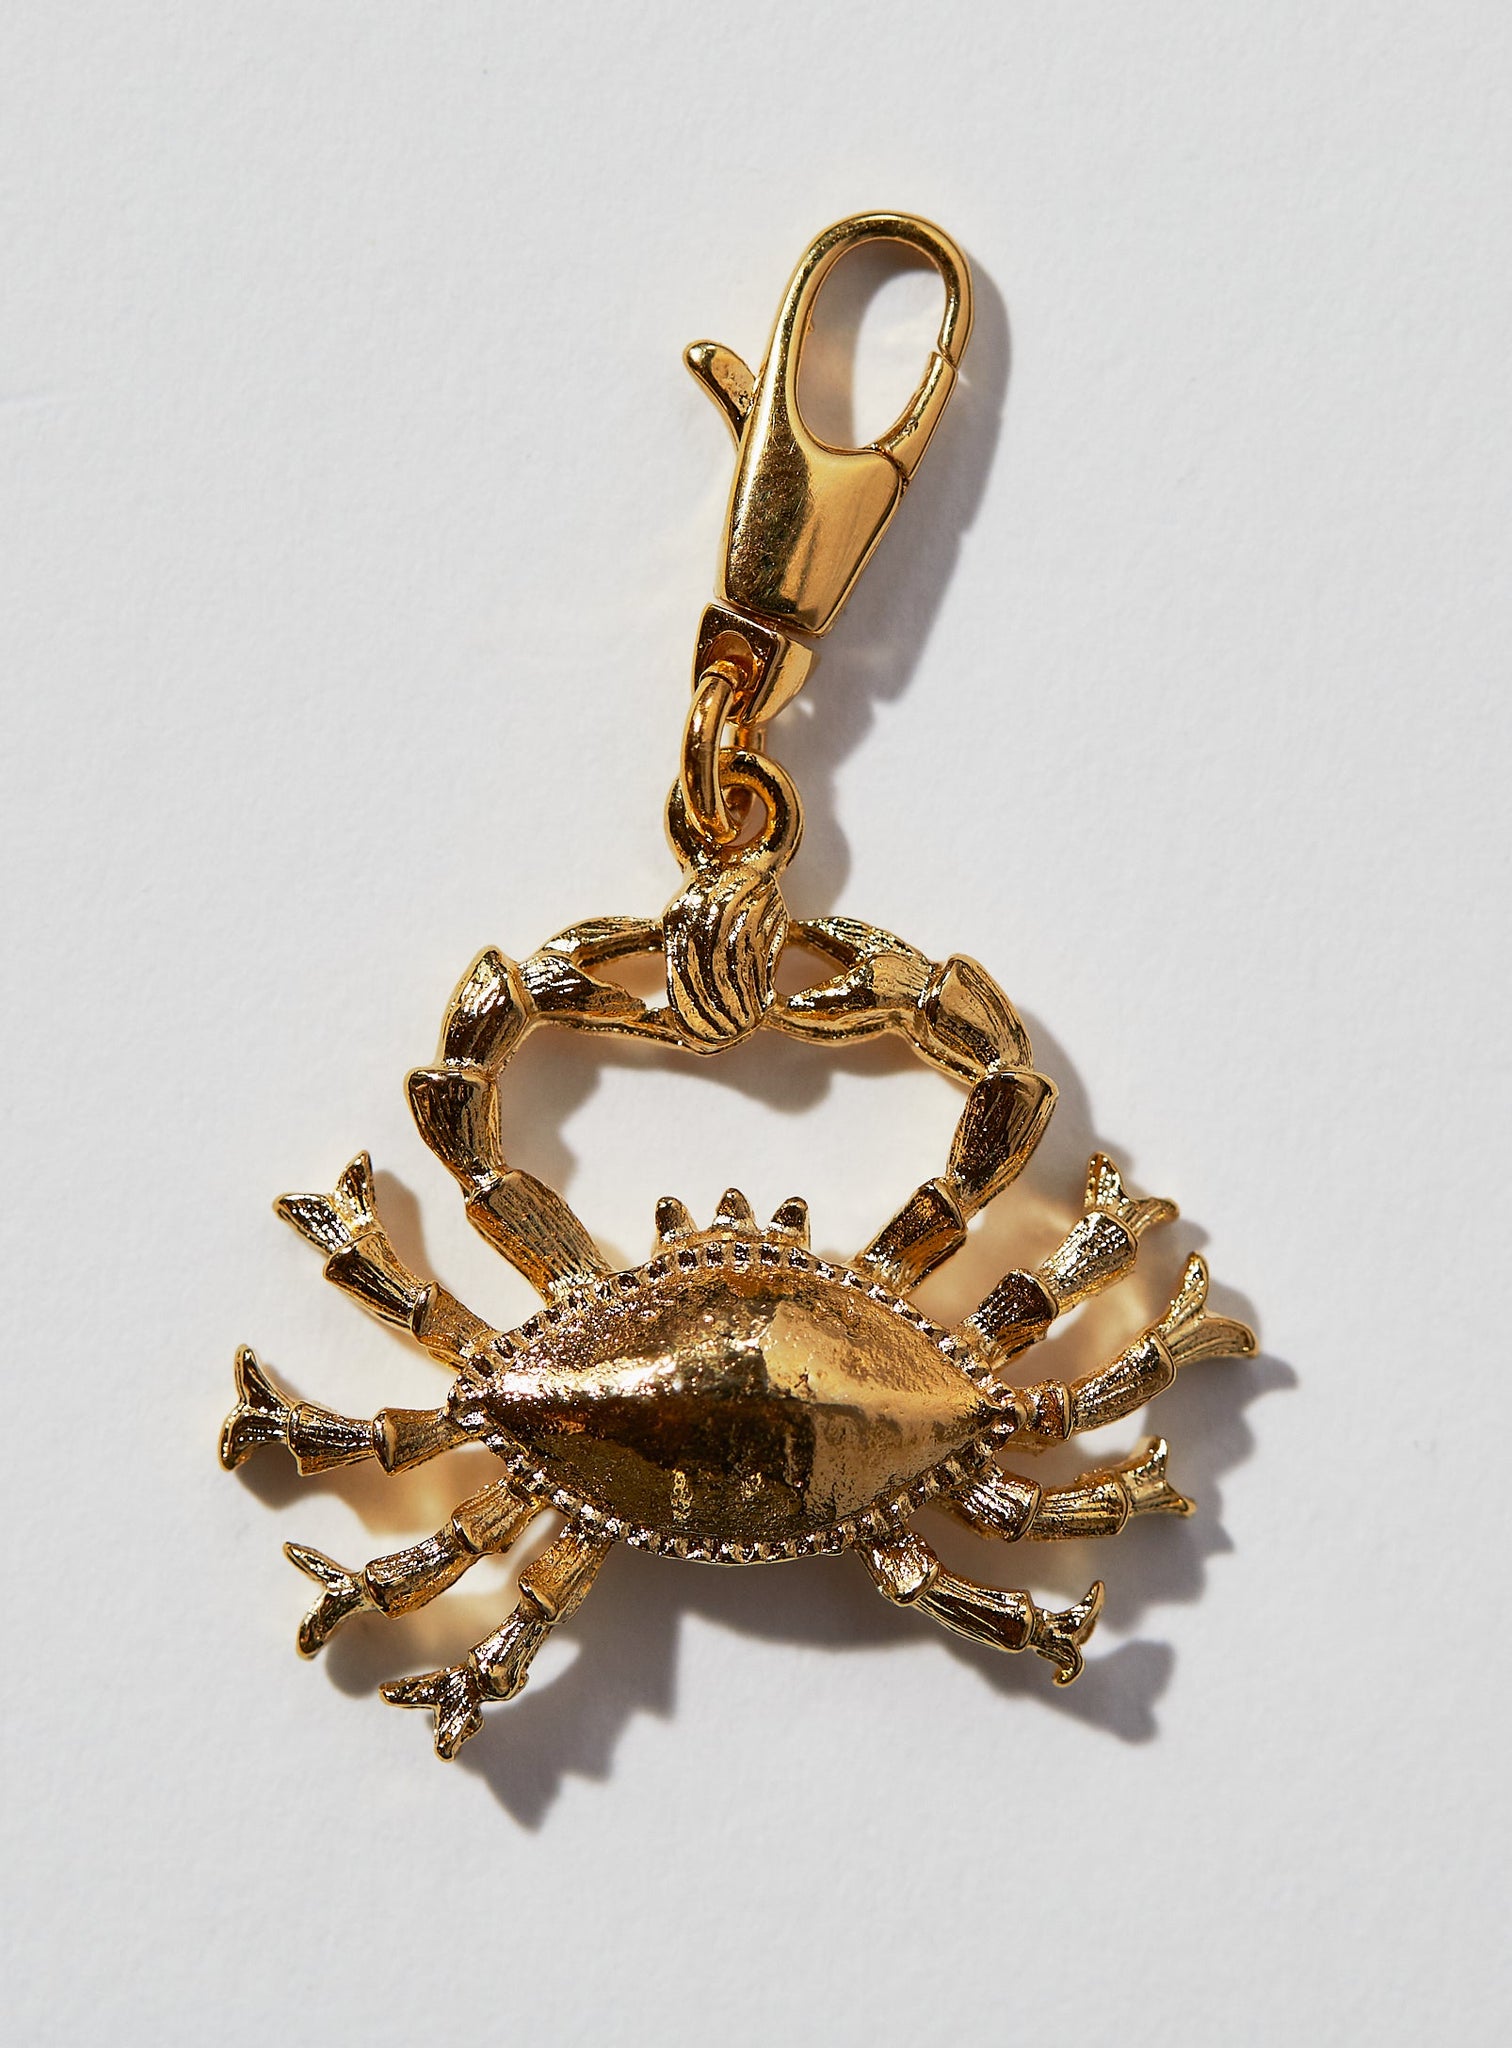 Cancer Zodiac Charm: This 3 dimensional pendant comes in 22k gold or rhodium electroplate and a swivel lobster clasp for the best possible displaying of your astrological self. This zodiac charm is perfect for adding onto our zodiac necklace or any other necklace or bracelet.  SEE OUR OTHER PRODUCT LISTINGS TO BUY THE CHAIN  If not in stock, item takes approximately 4-8 weeks to produce. Feel free to email info@paricijewellery.com to see if item is currently in stock.